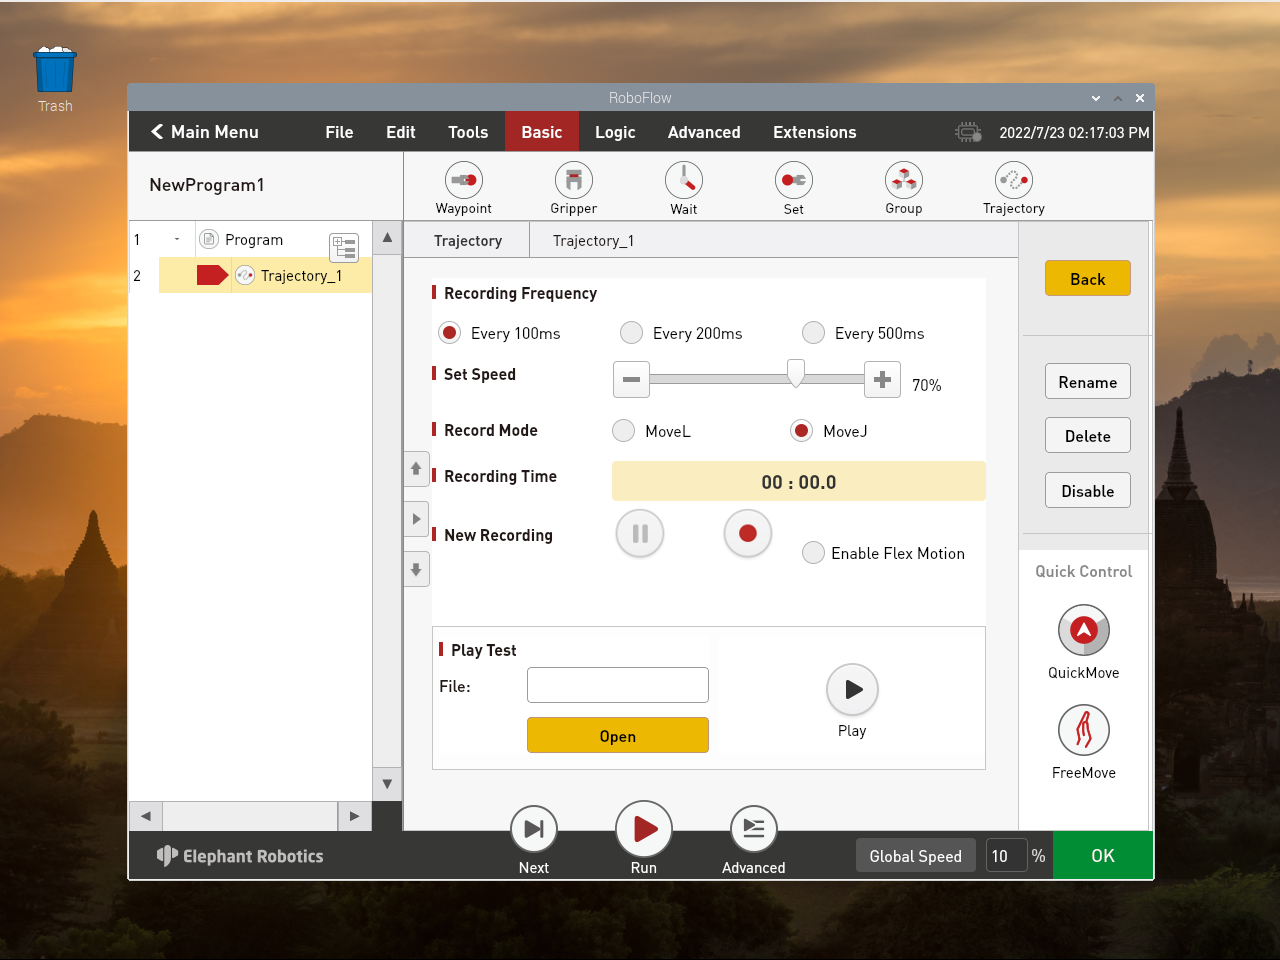 Auto Mouse Clicker 13.1.3 Free Download for Windows 10, 8 and 7 